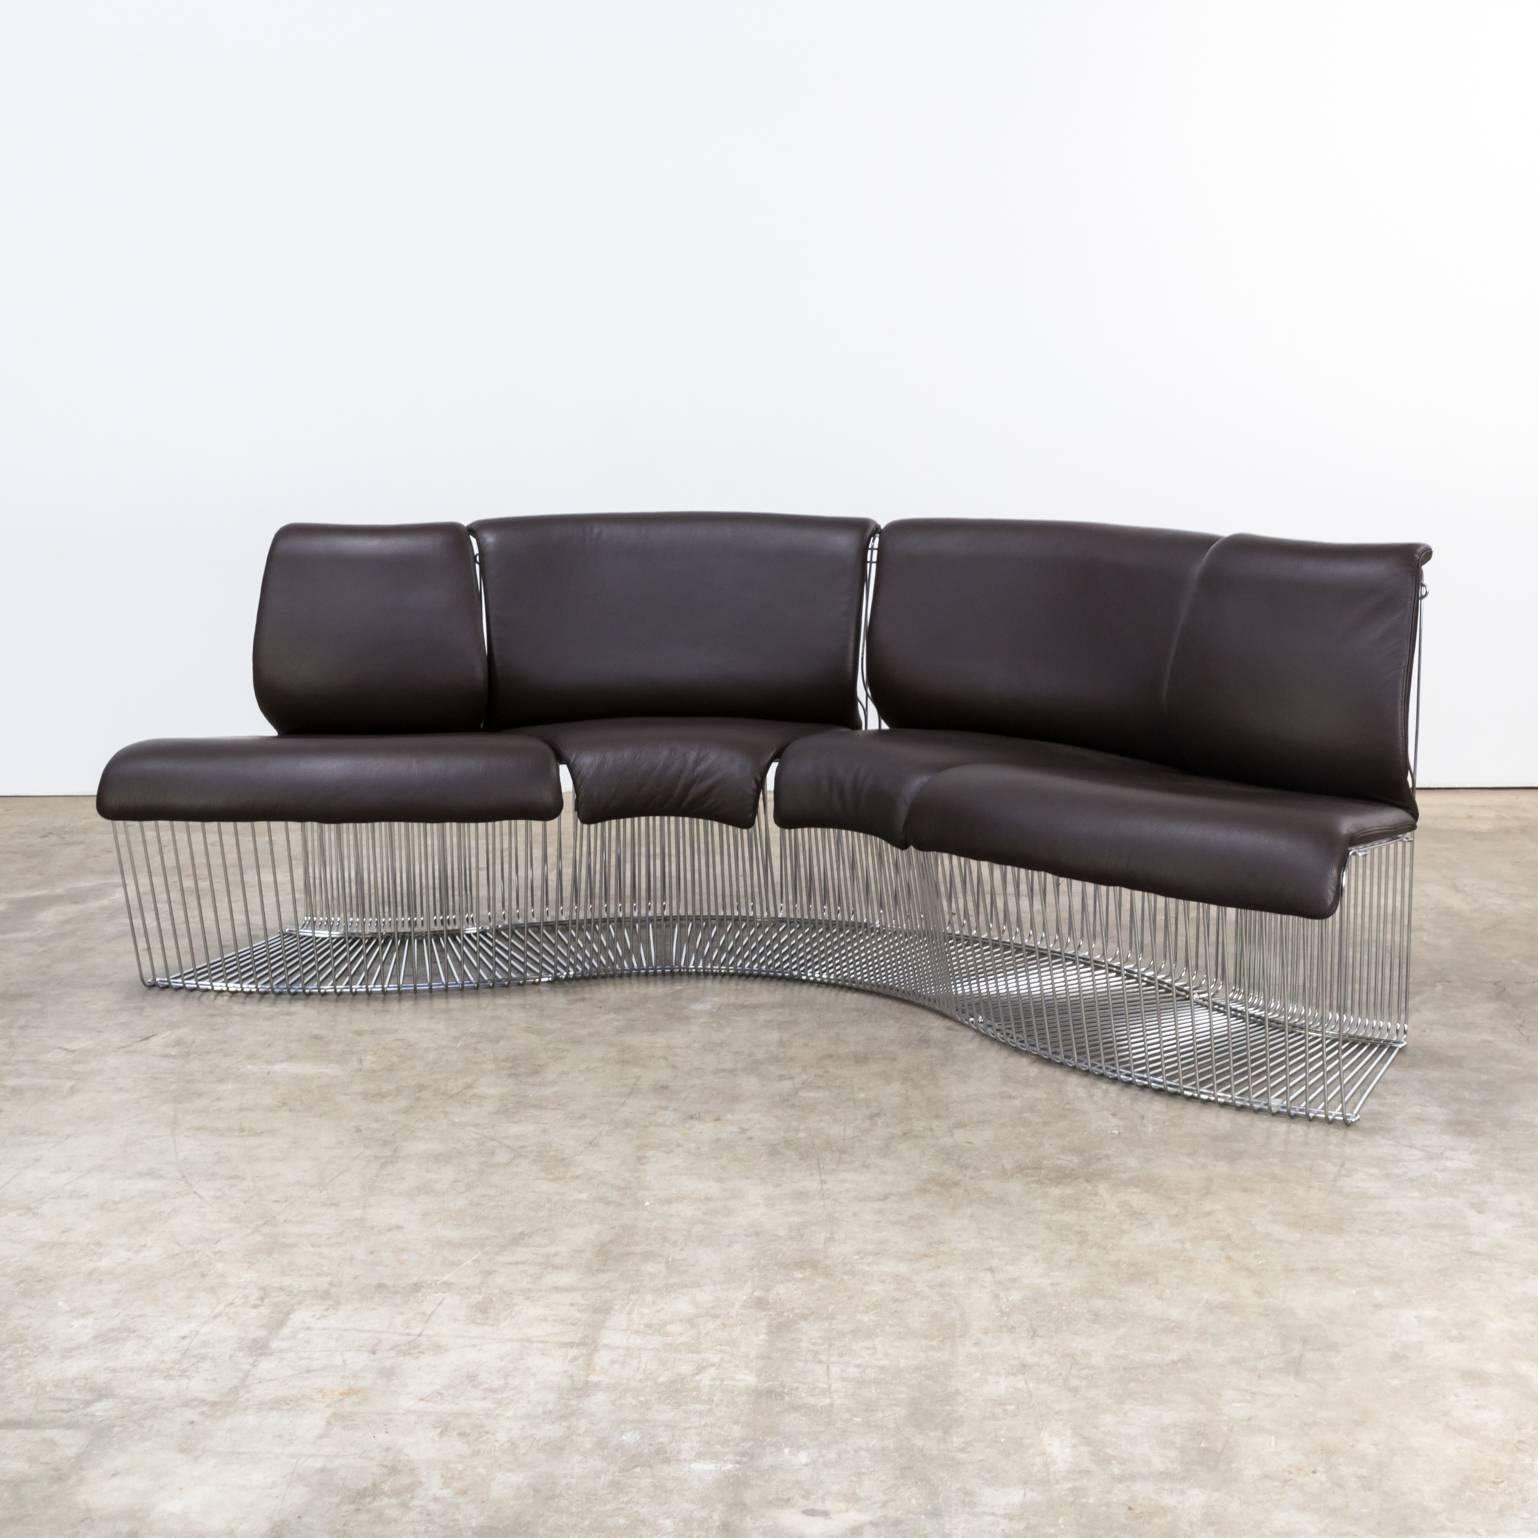 1970s Verner Panton sofa ‘pantonova’ four-piece for Fritz Hansen. Good condition, wear consistent with age and use.